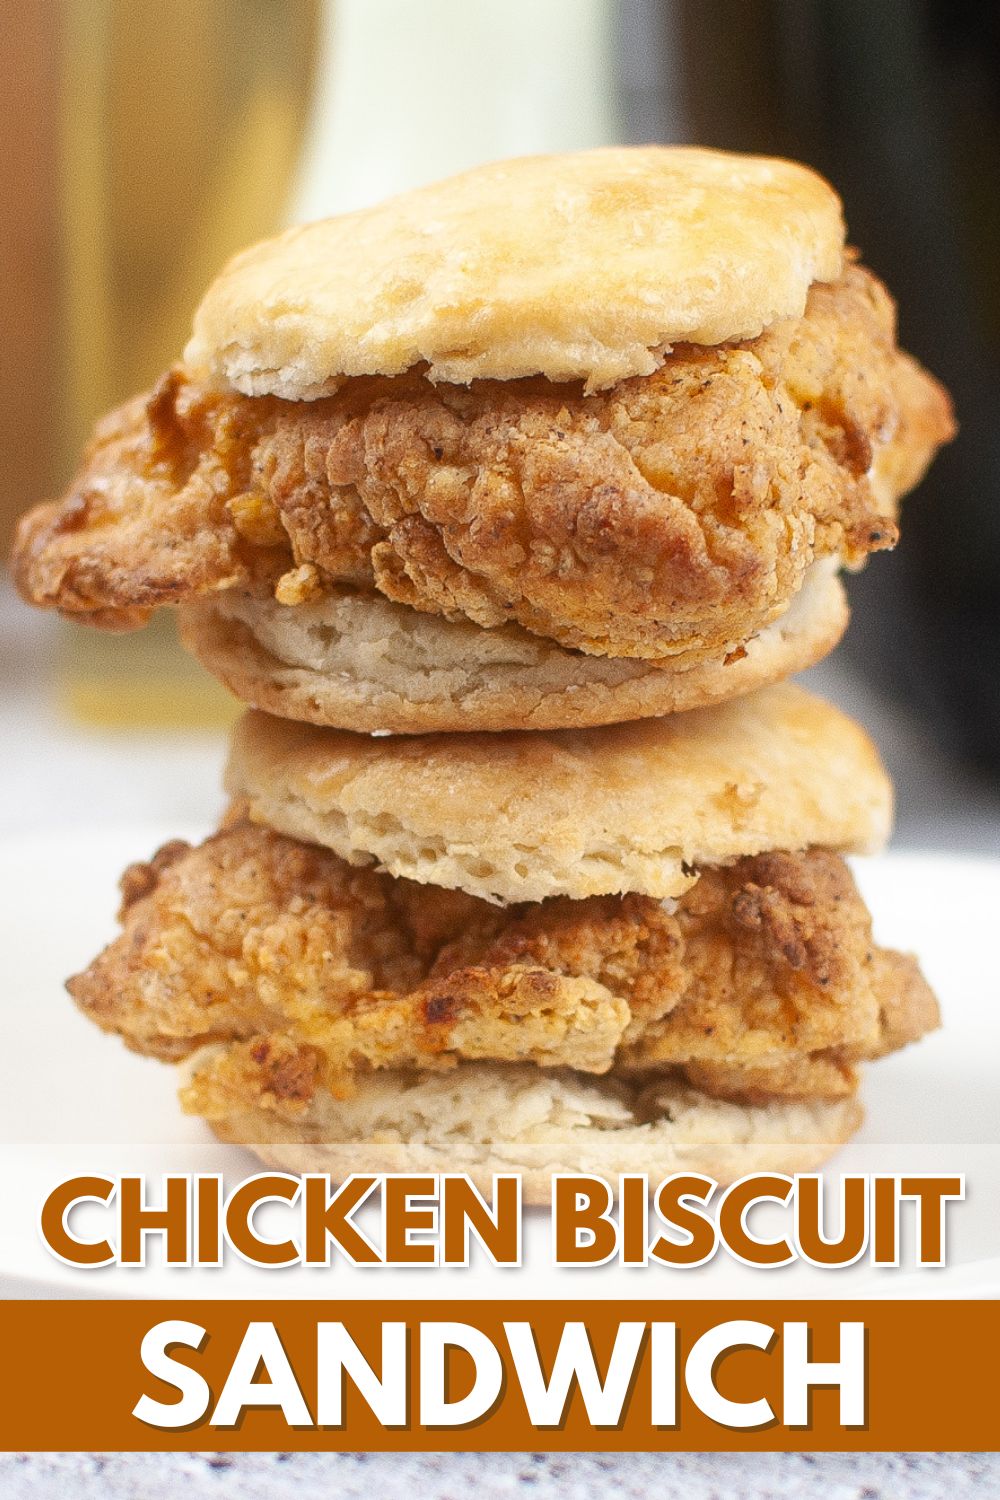 A stack of Chicken Biscuit Sandwiches with the text "Chicken Biscuit Sandwich.